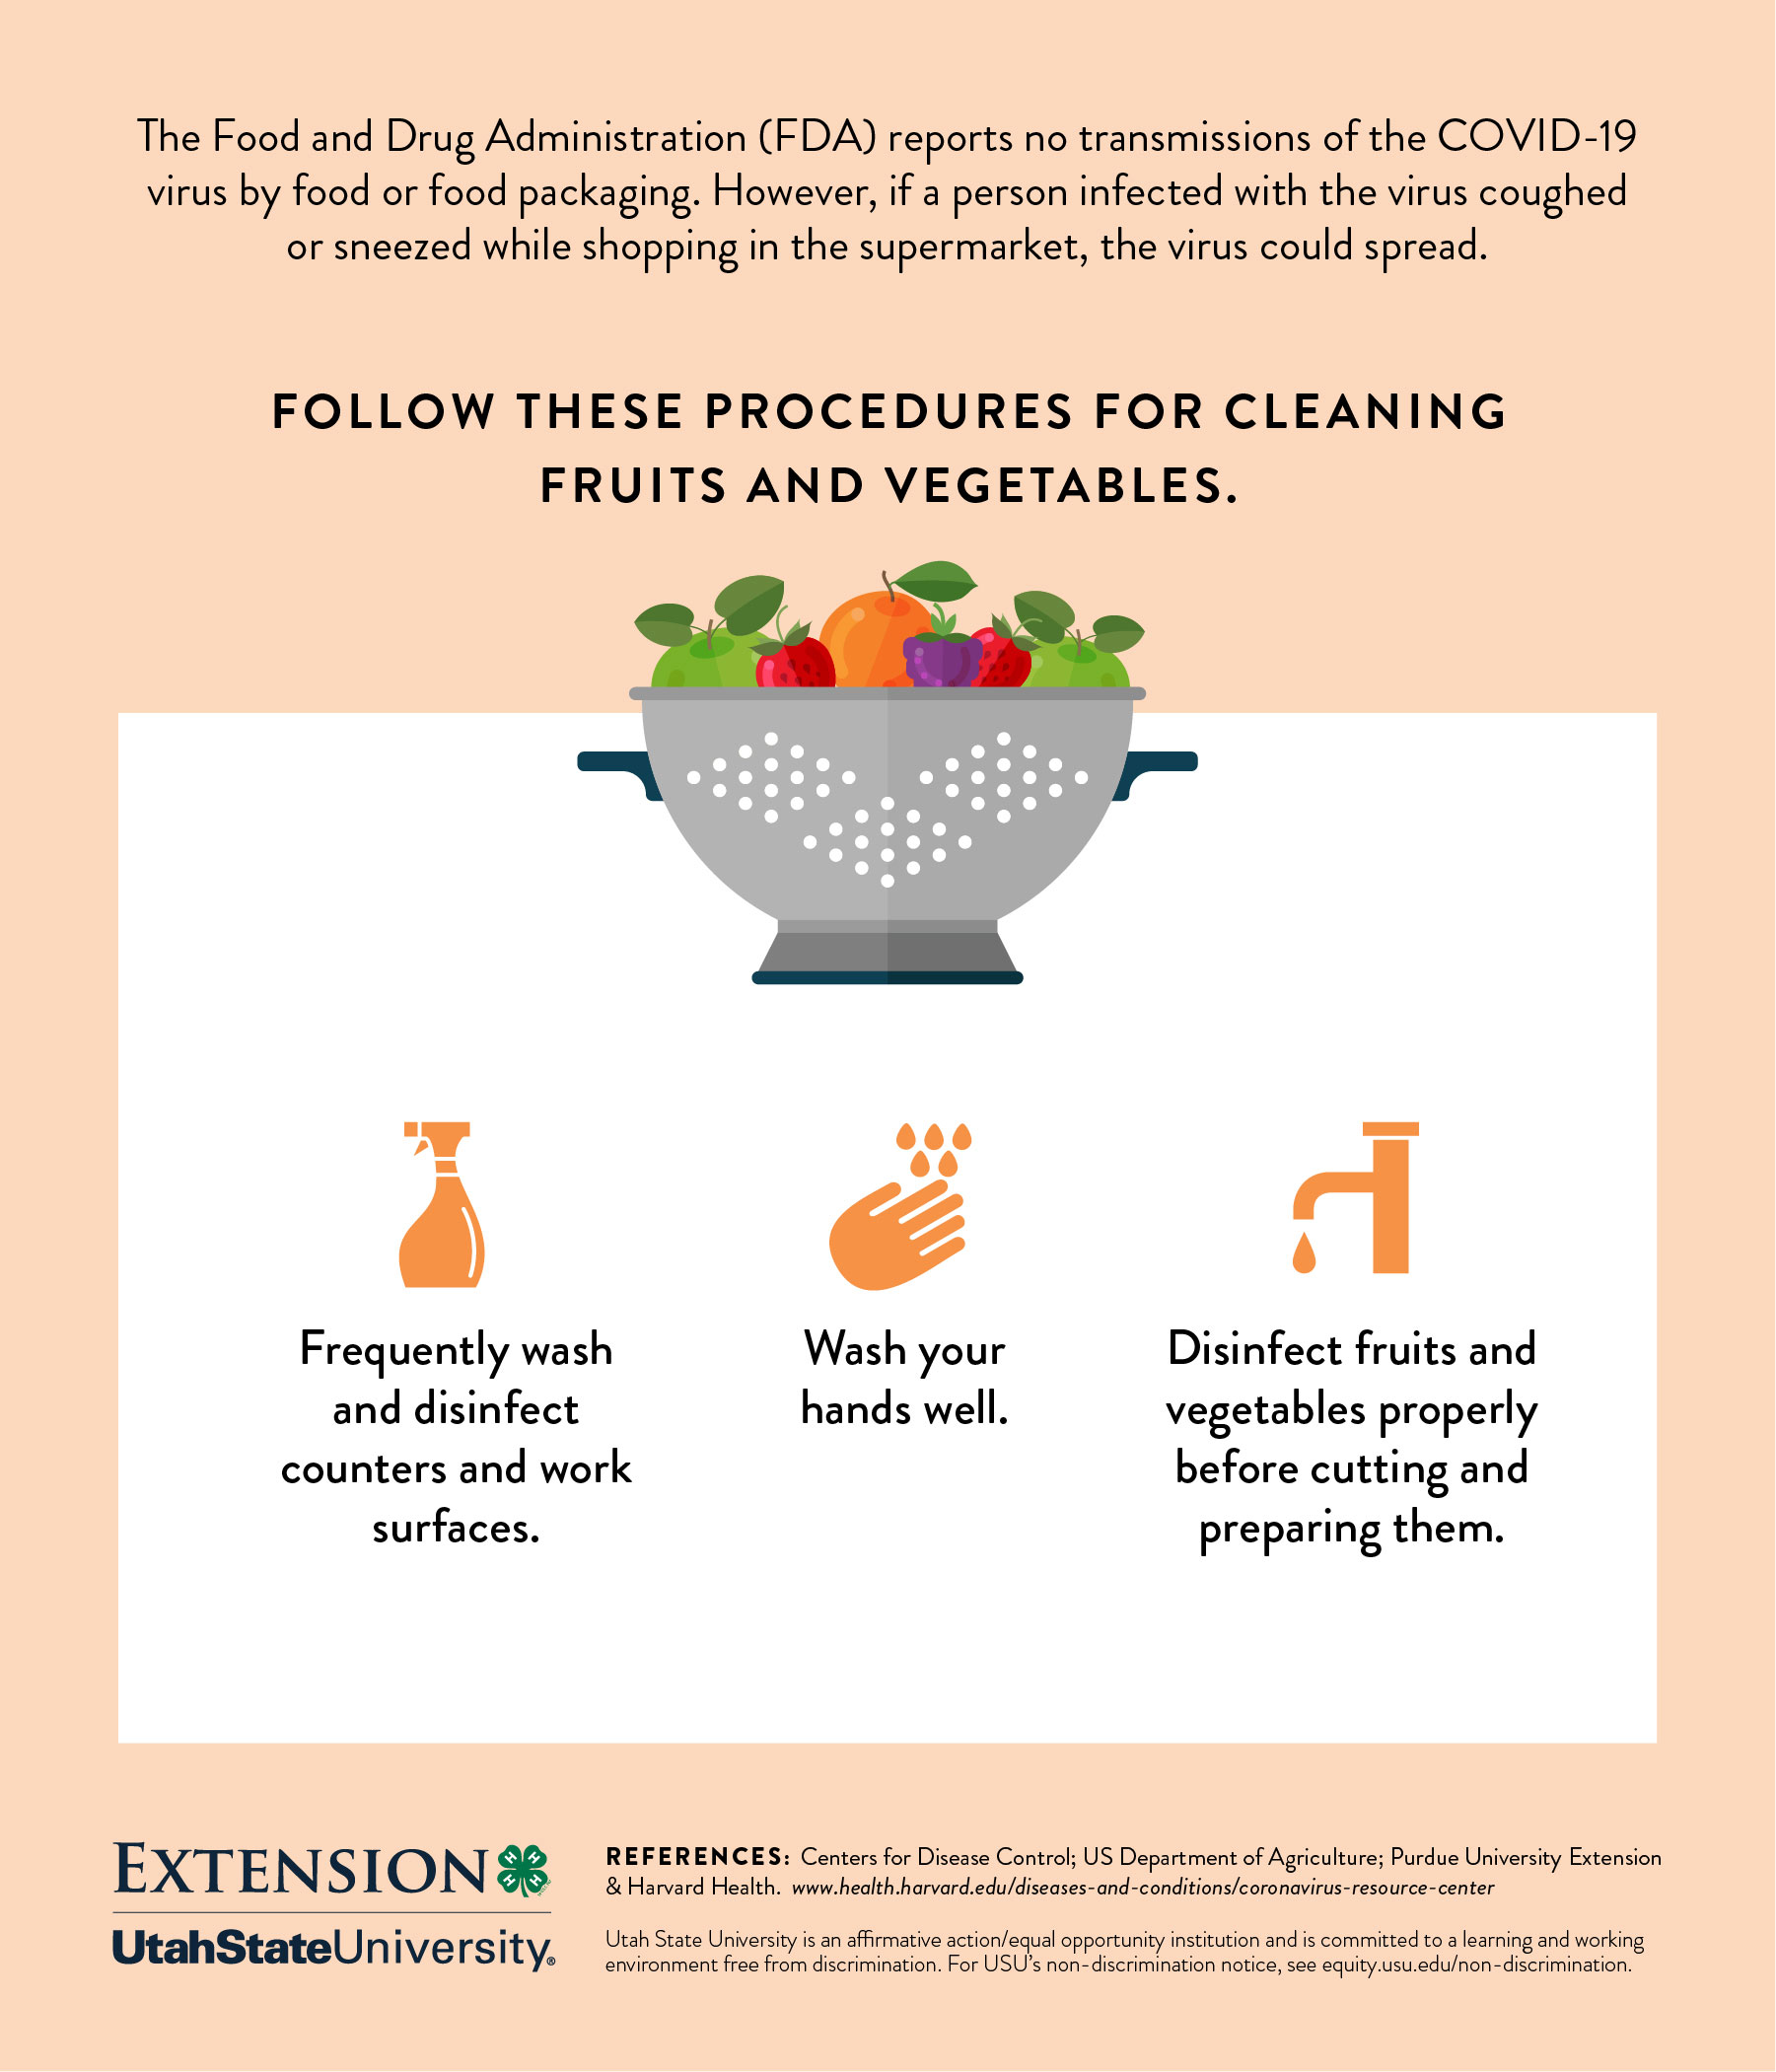 Cleaning fruits and veggies